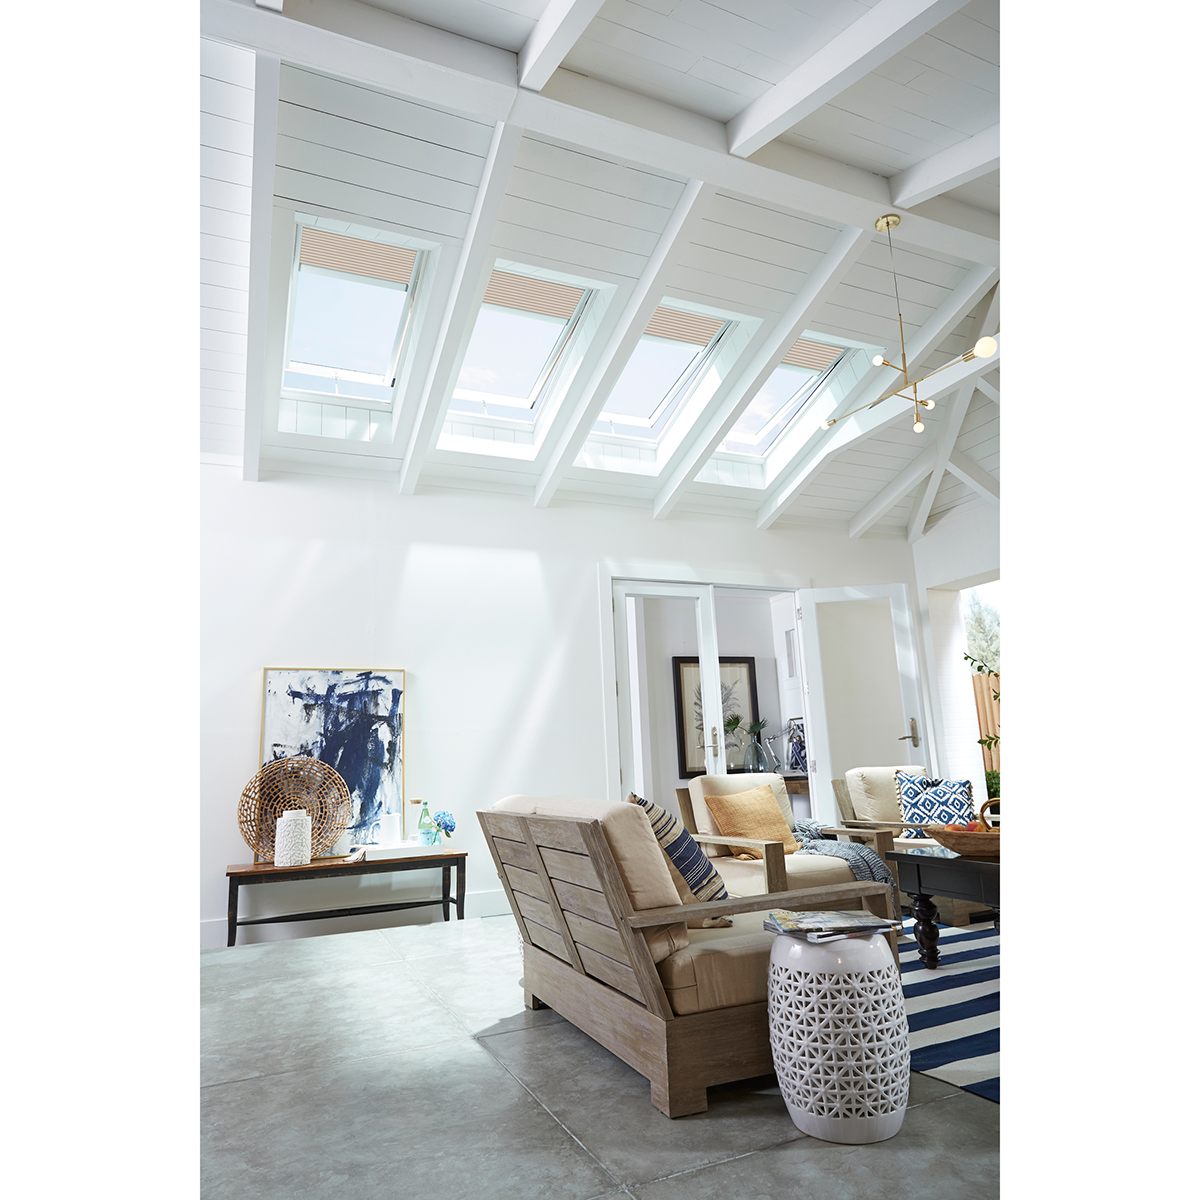 Electric Deck-Mount Skylight with Laminated Low-E3 Glass - 21 in. x 26-7/8 in. - VSE C01